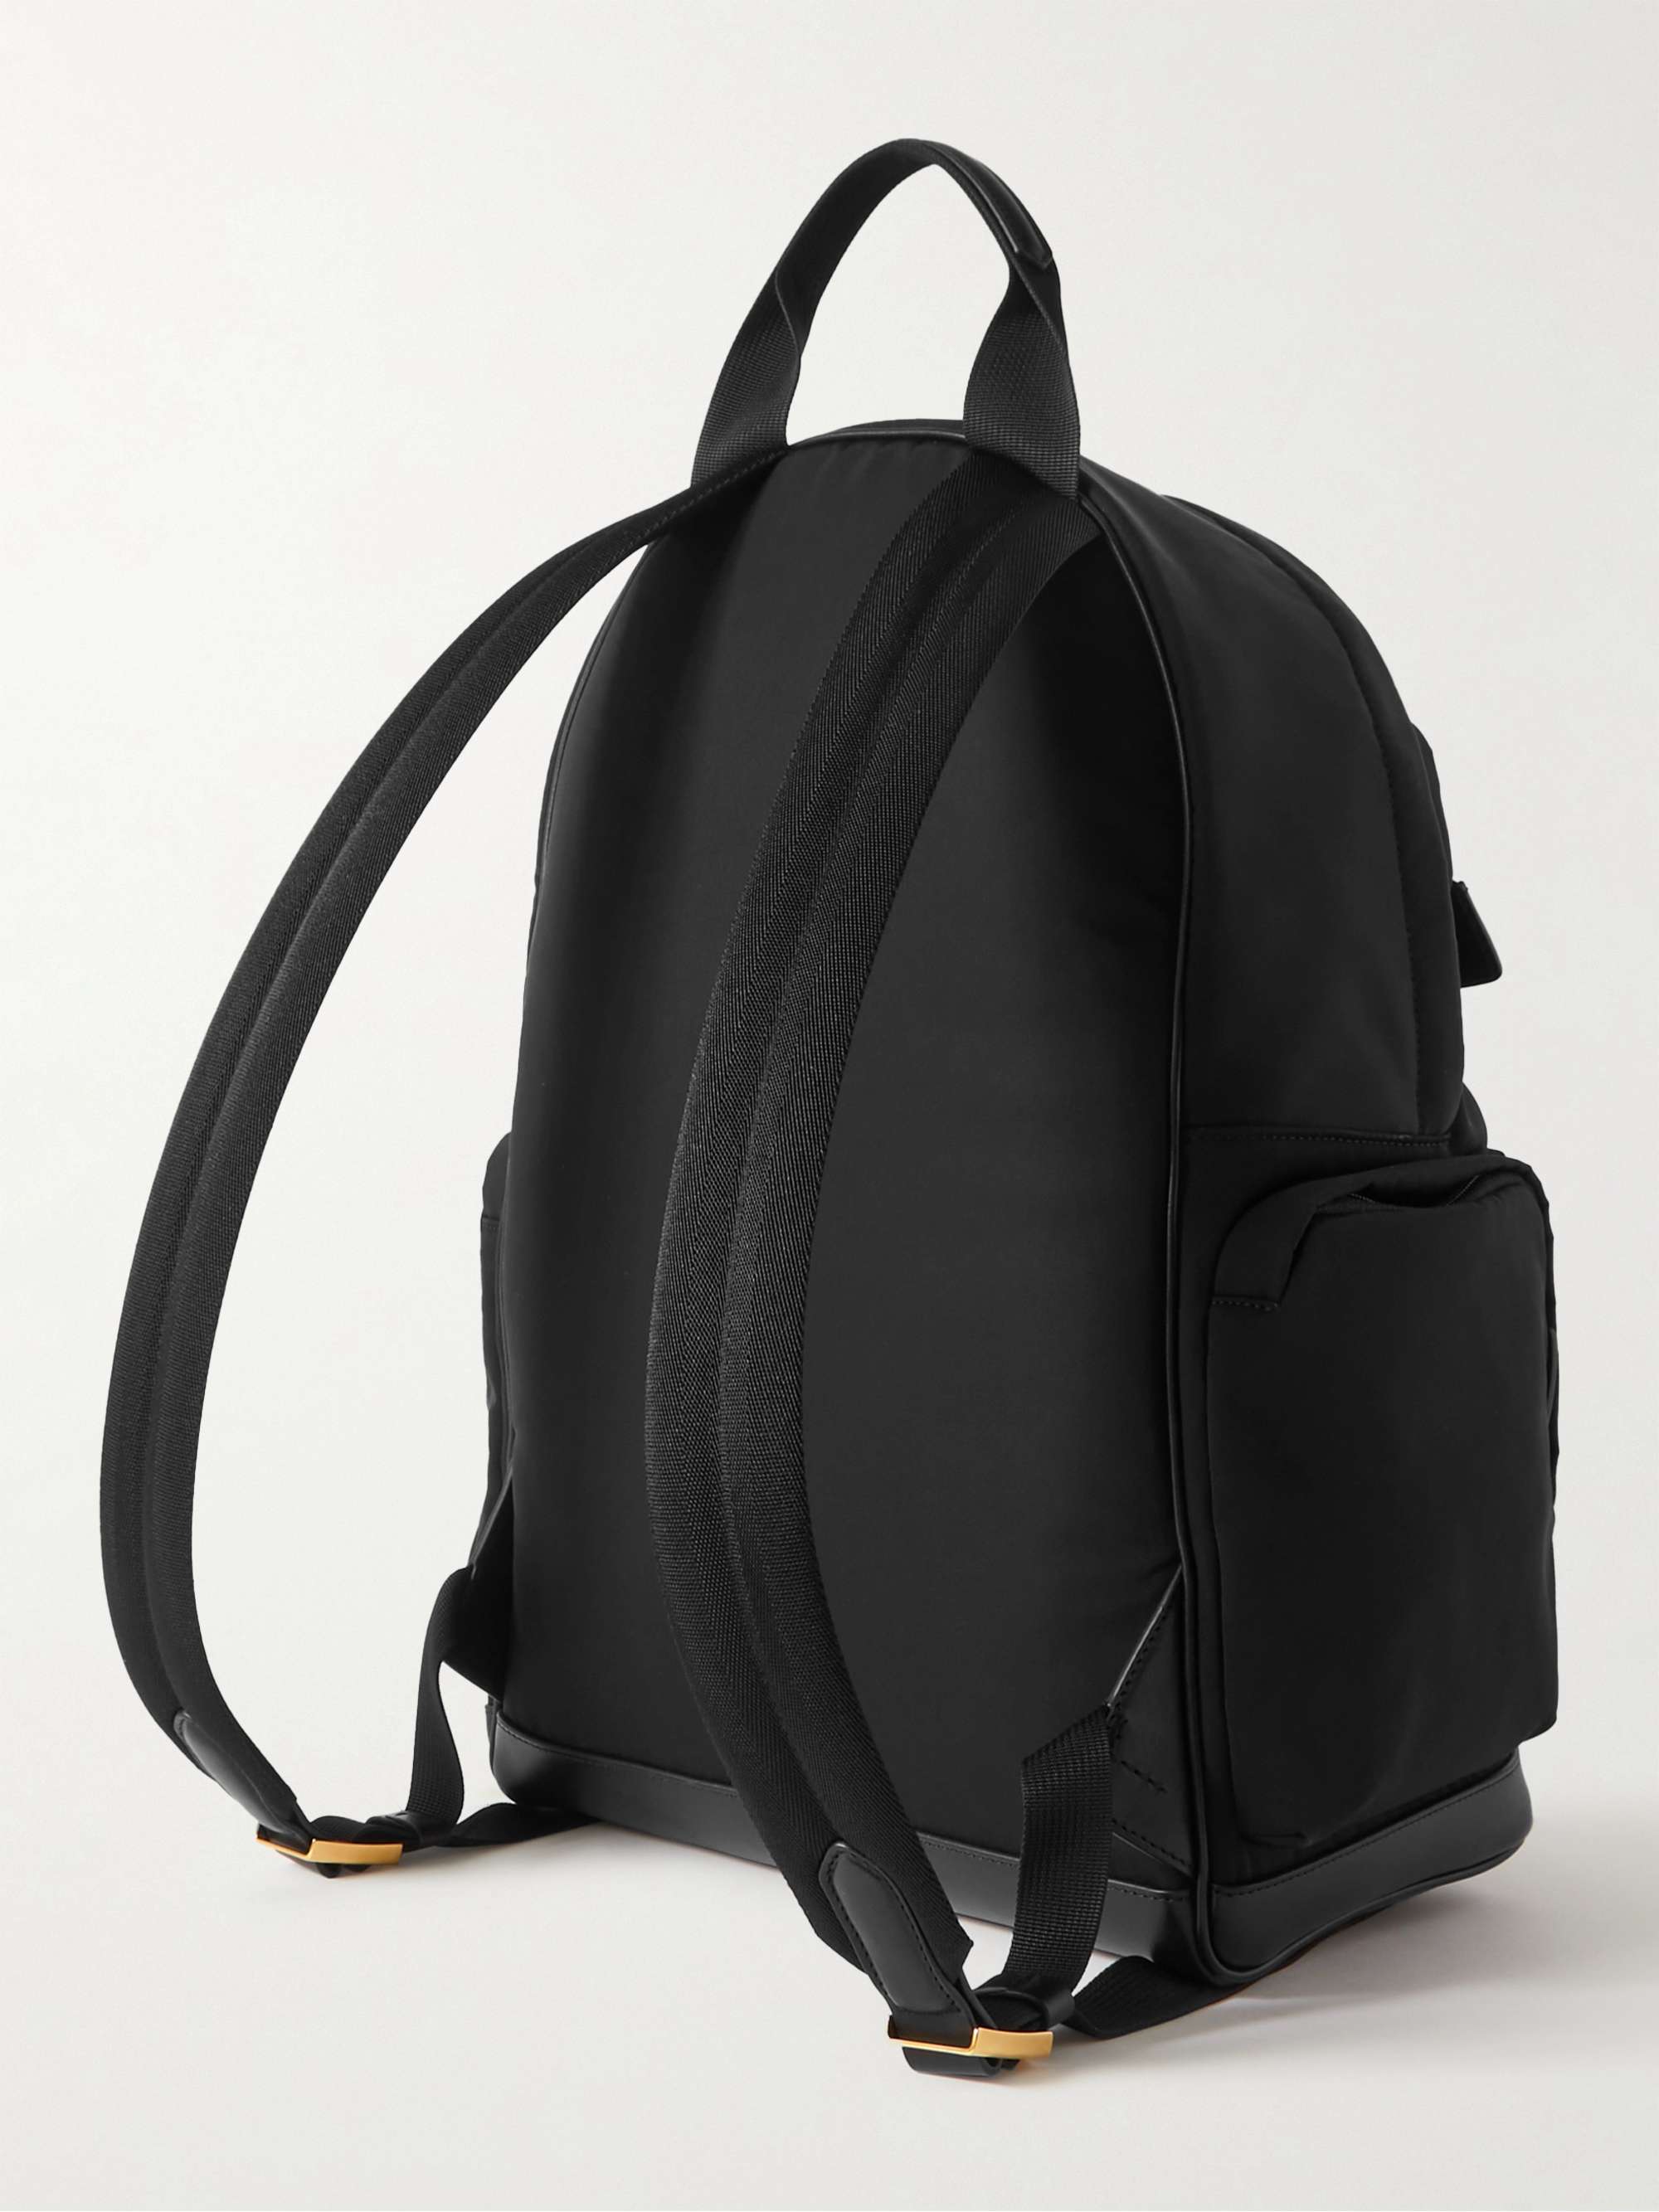 TOM FORD Leather-Trimmed Recycled Nylon Backpack